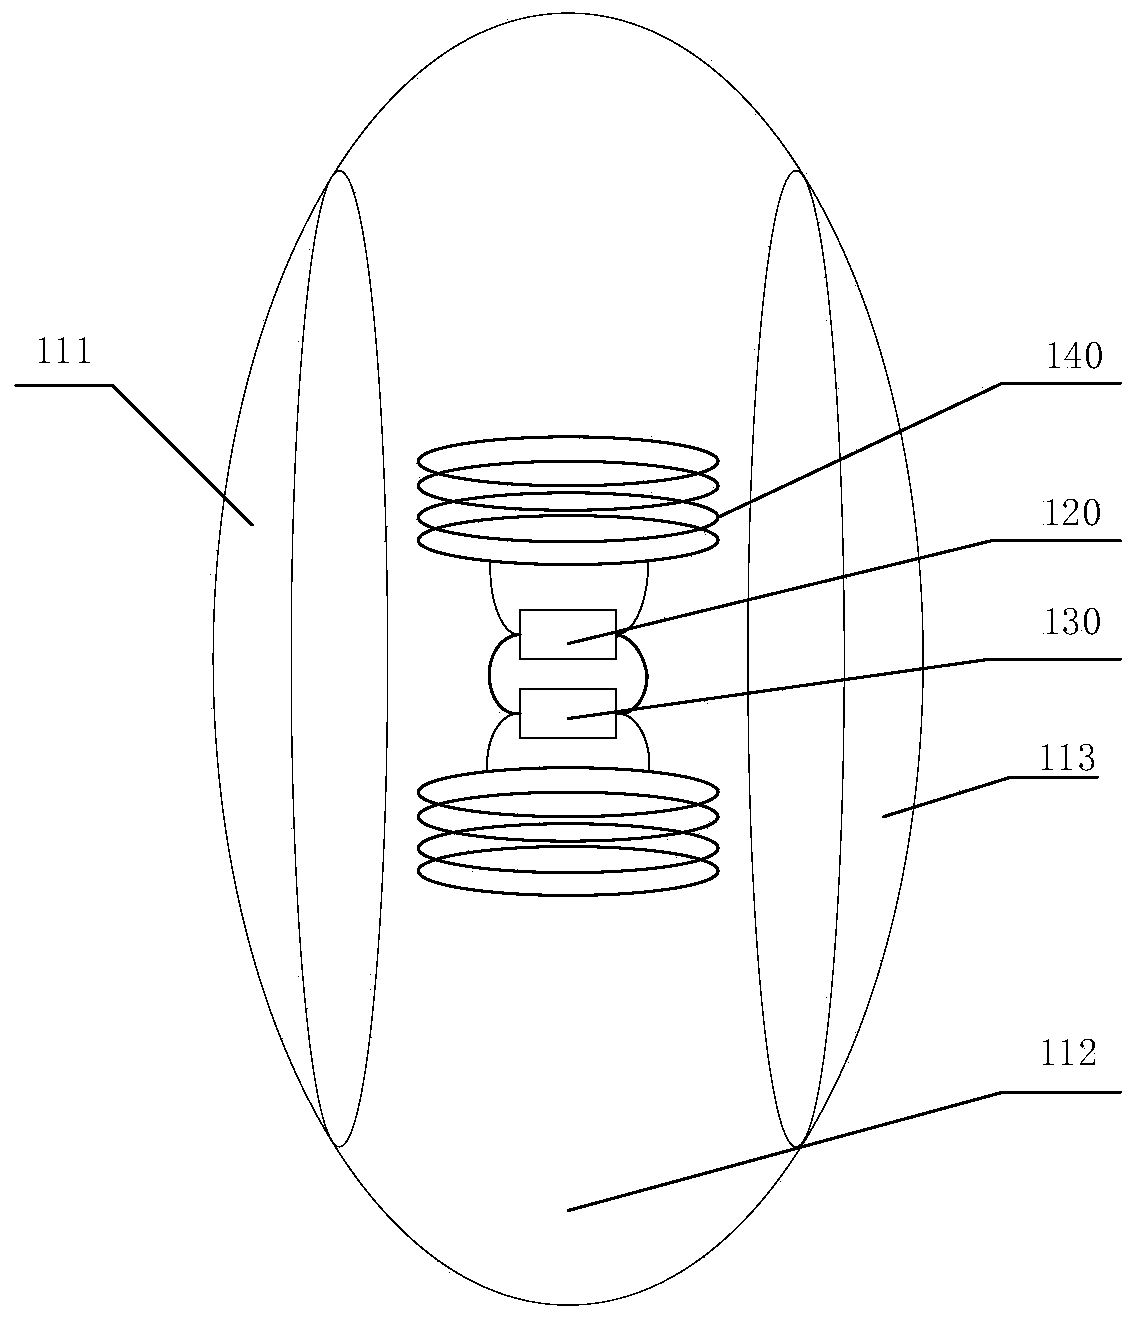 Implantable animal motion monitoring device, system and method